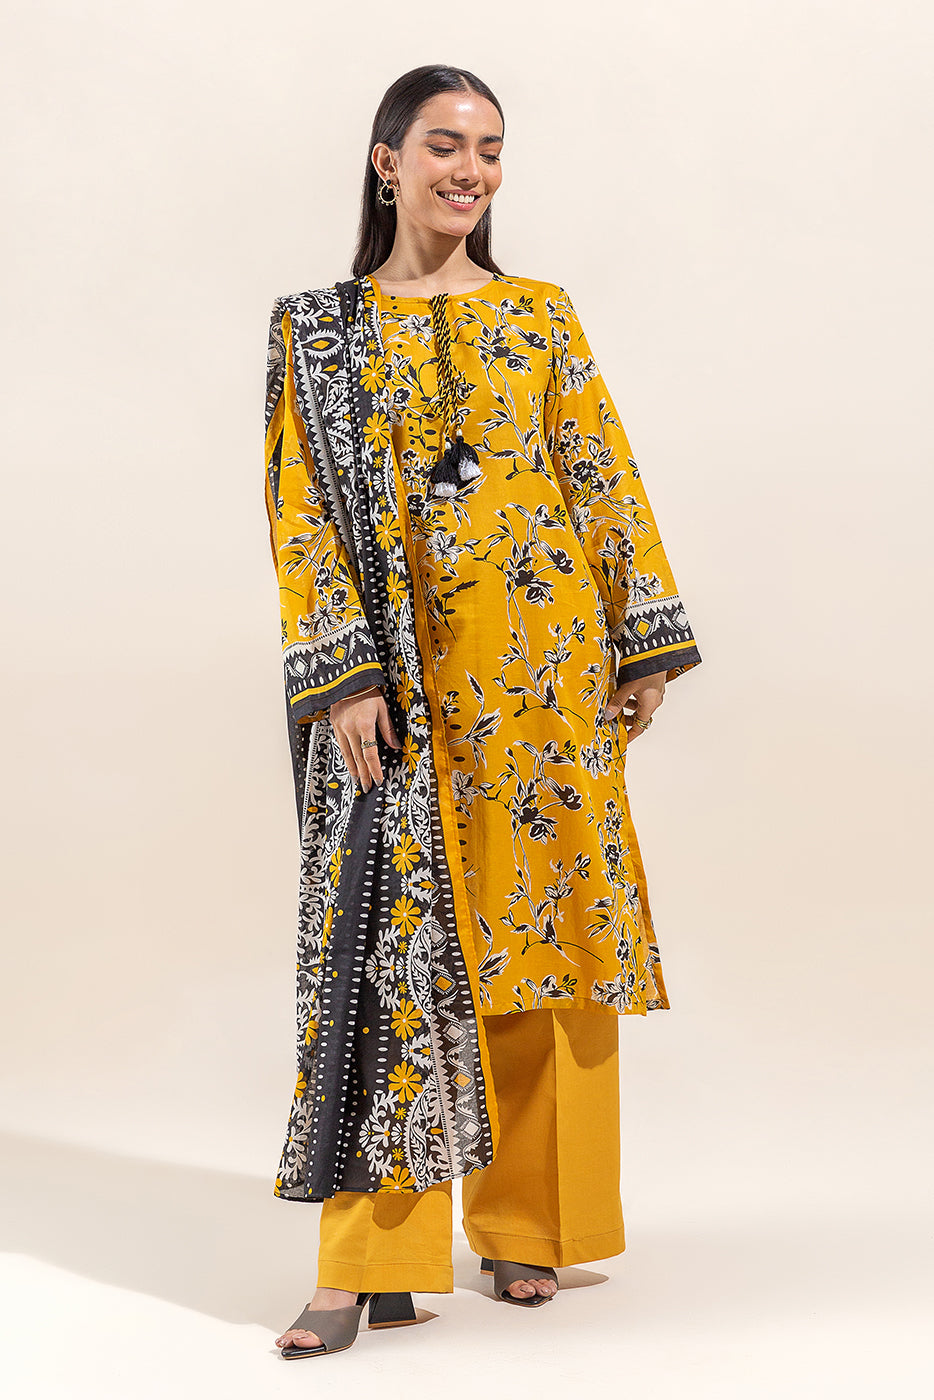 2 PIECE PRINTED LAWN SUIT-YELLOW MIST (UNSTITCHED)